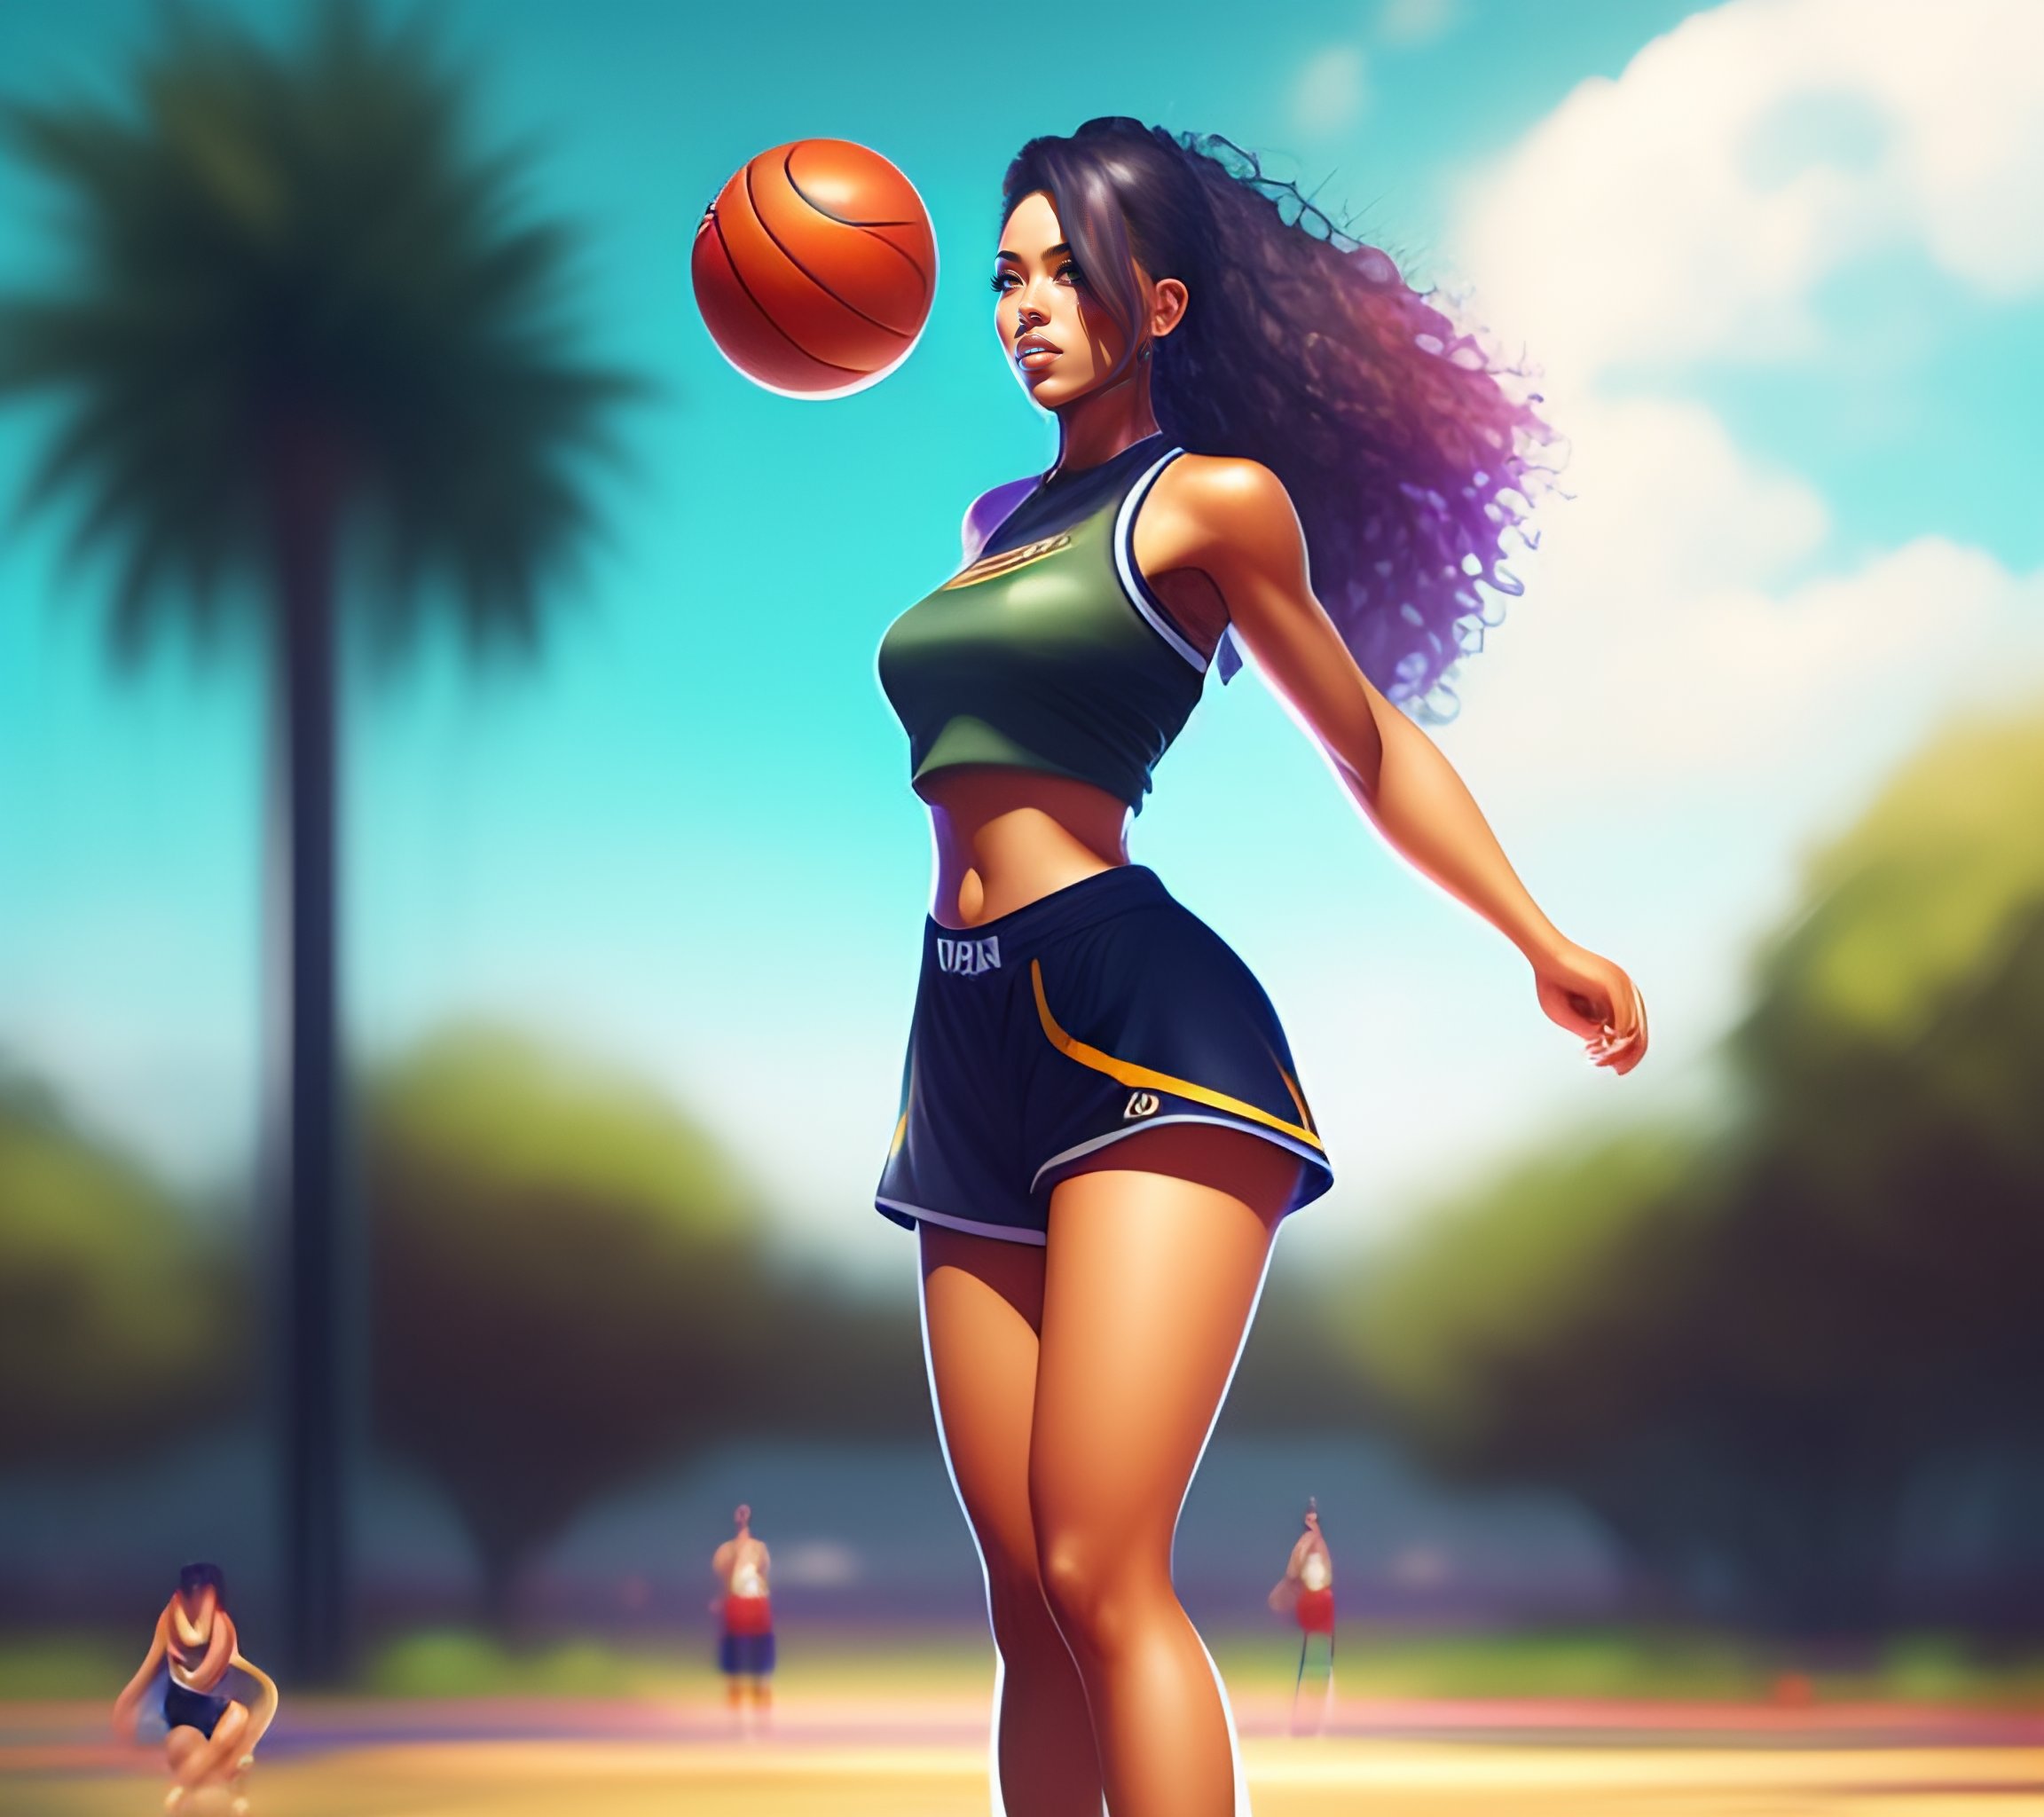 Lexica - A woman in a sports bra top and shorts, featured on dribble,  superflat, dynamic pose, behance hd, flat shading, blond, app icon